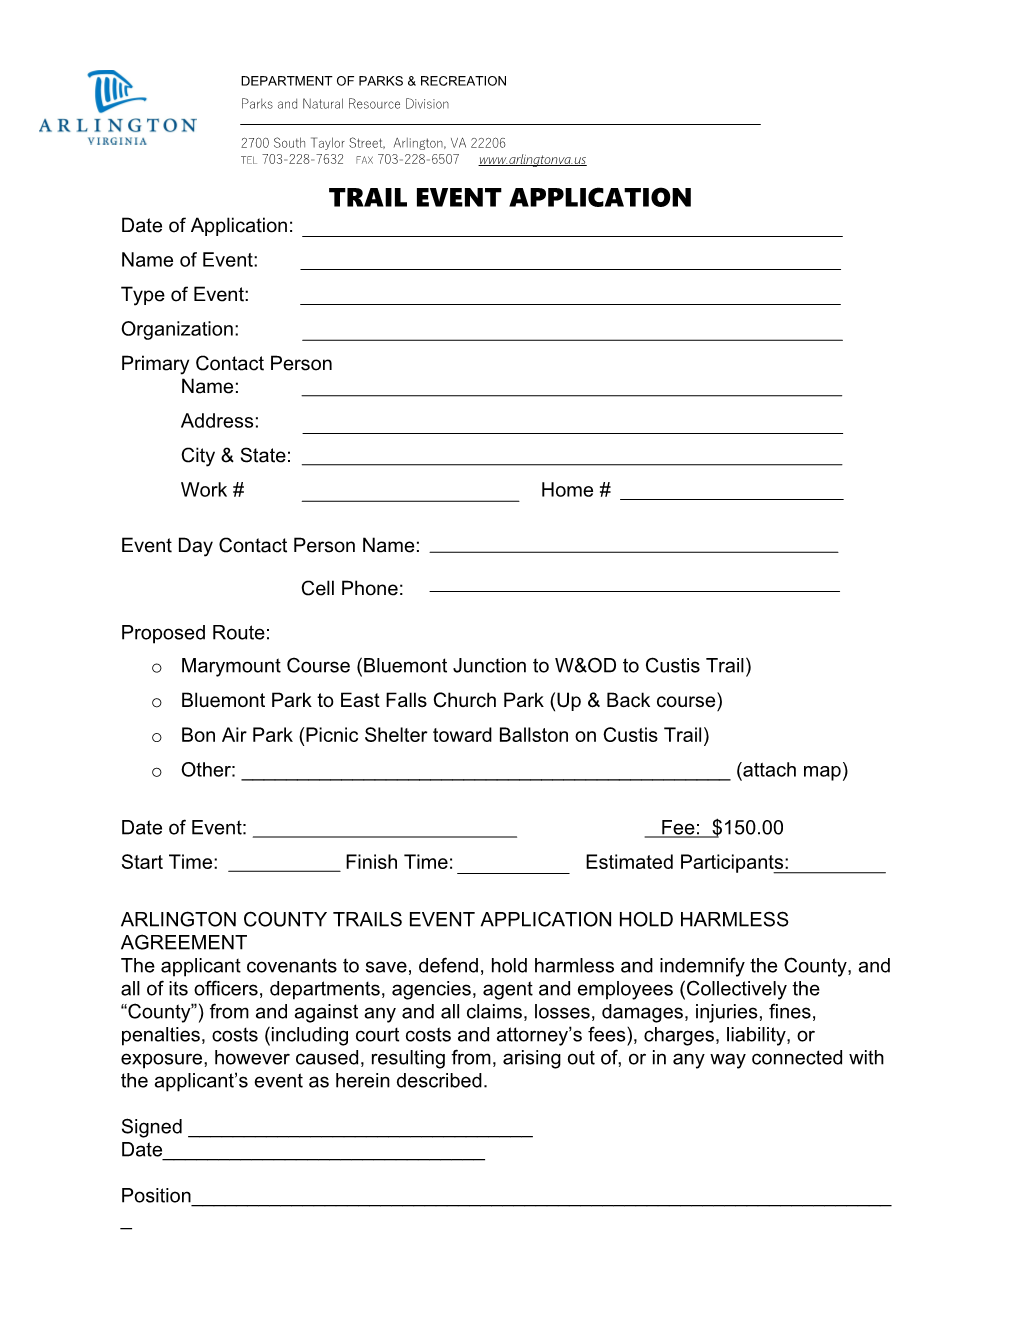 Trail Event Application